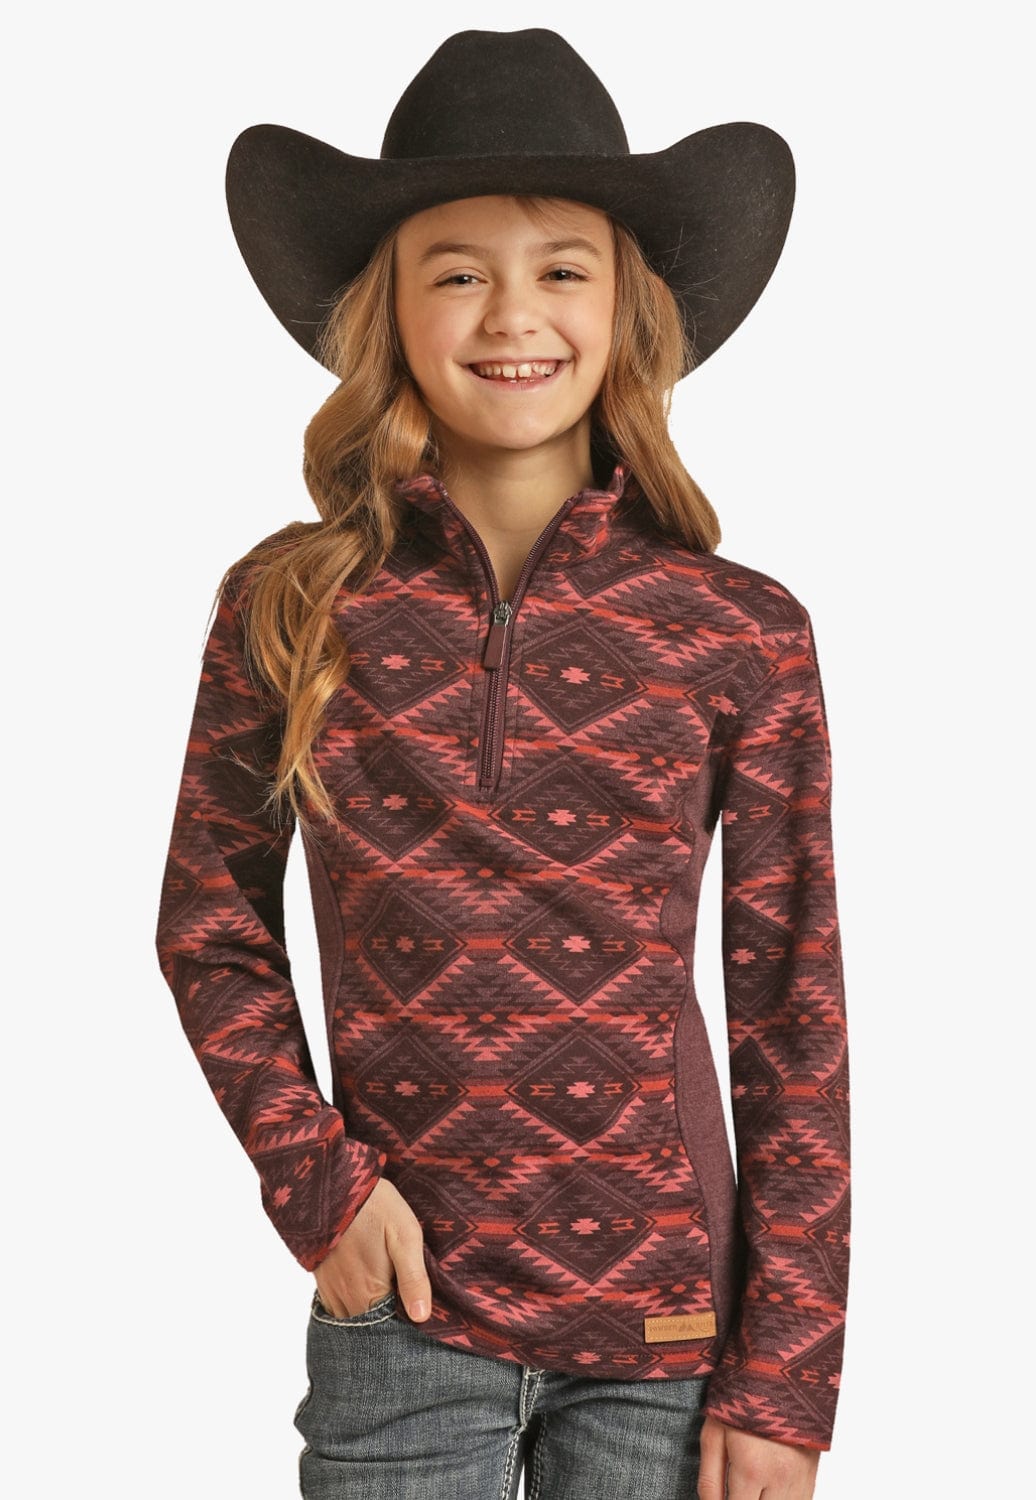 Panhandle CLOTHING-Boys Pullovers Panhandle Kids Aztec Knit Quarter Zip Pullover